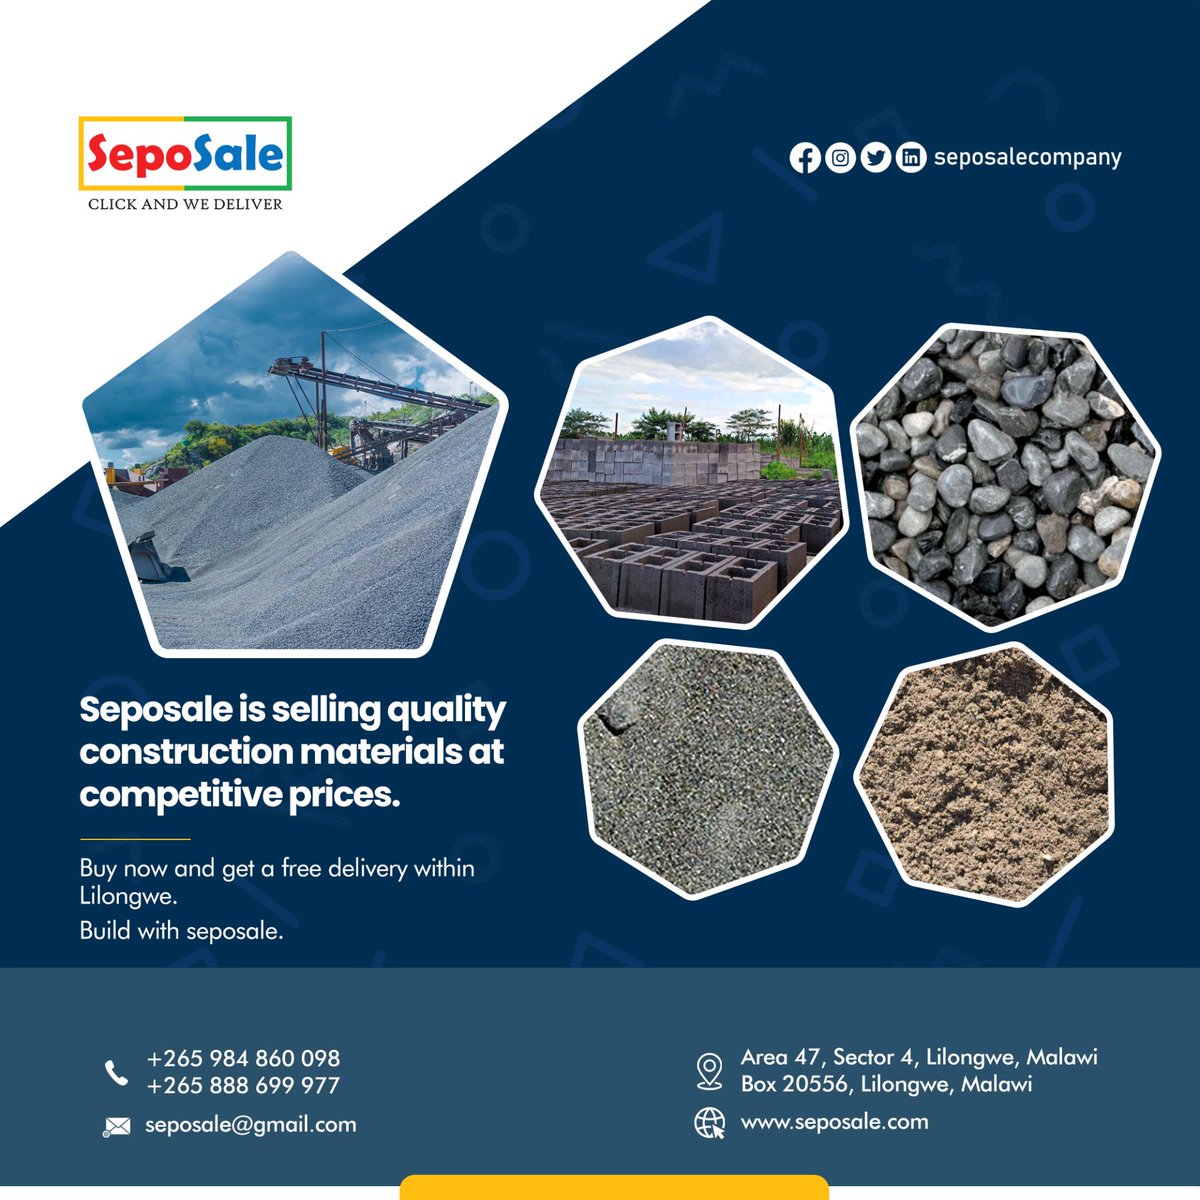 Get cement blocks, river sand, quarry stone, quarry dust, pebble stone and cement from Seposale. You Just click and we deliver 
#Seposale
#Buildingbetter